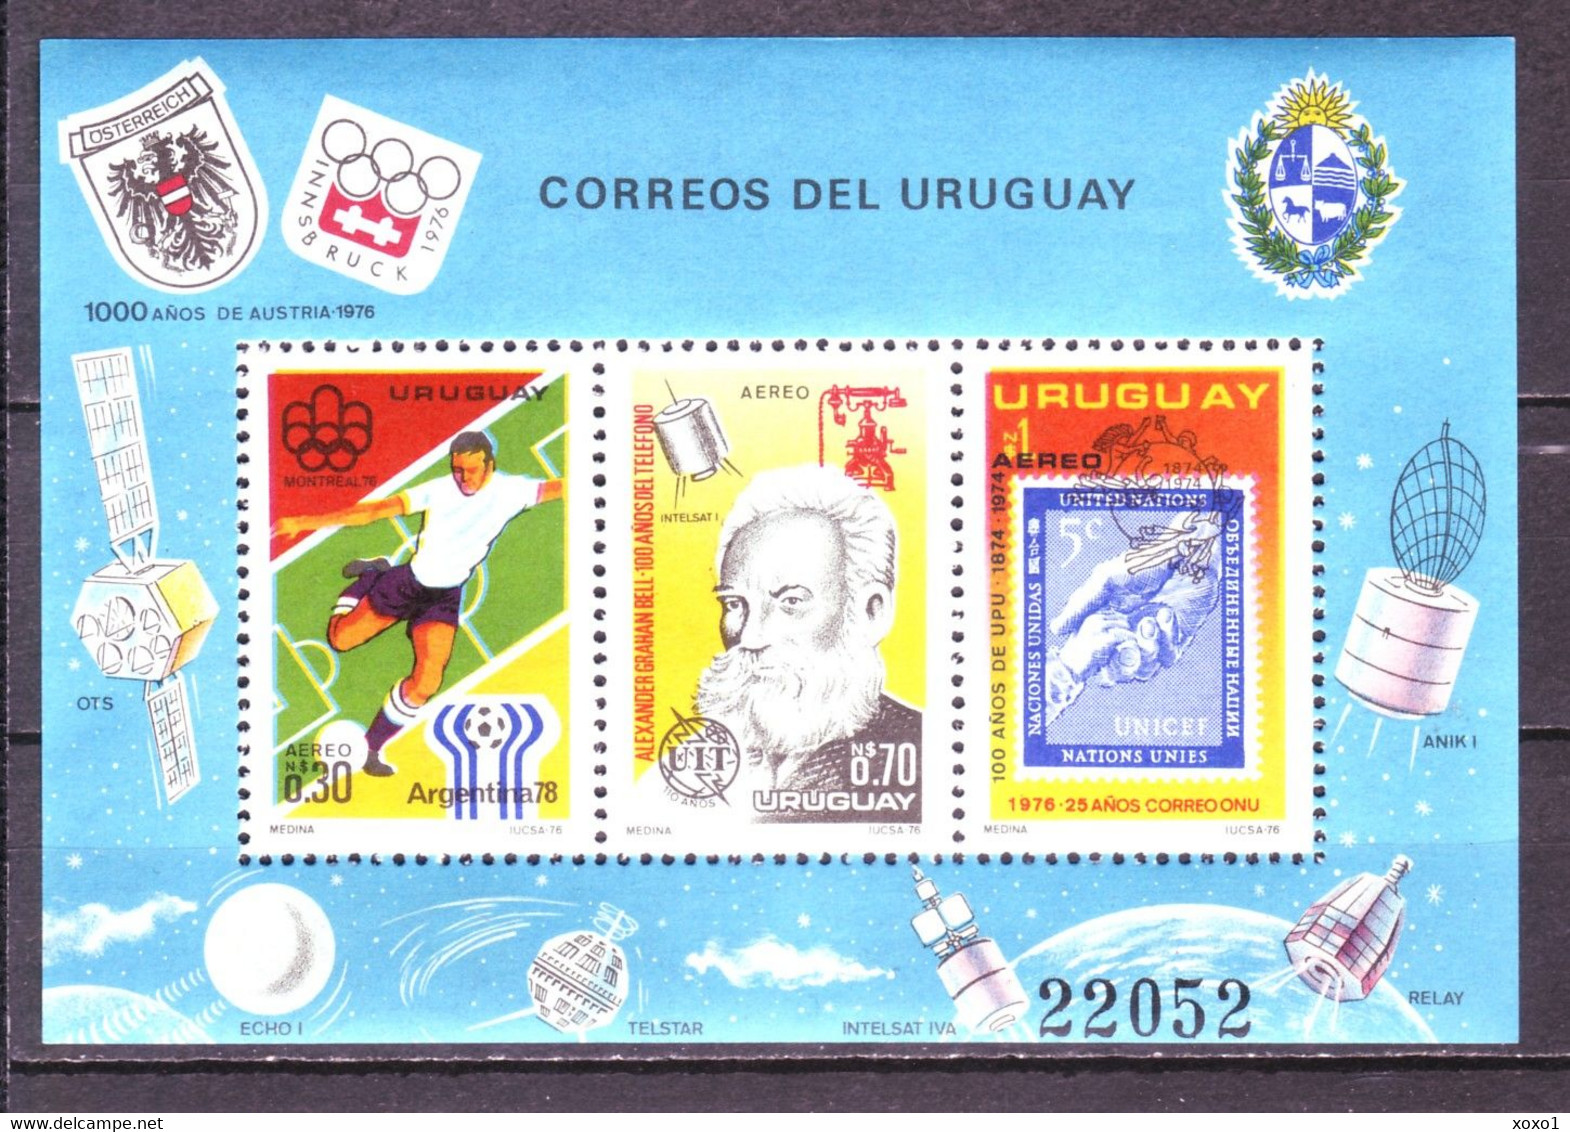 Uruguay 1976 MiNr. 1406 - 1408 (Block 29) Sport Olympic Games Space Soccer Stamps On Stamps UIT UPU 1 S\sh MNH** 55,00 € - Verano 1976: Montréal